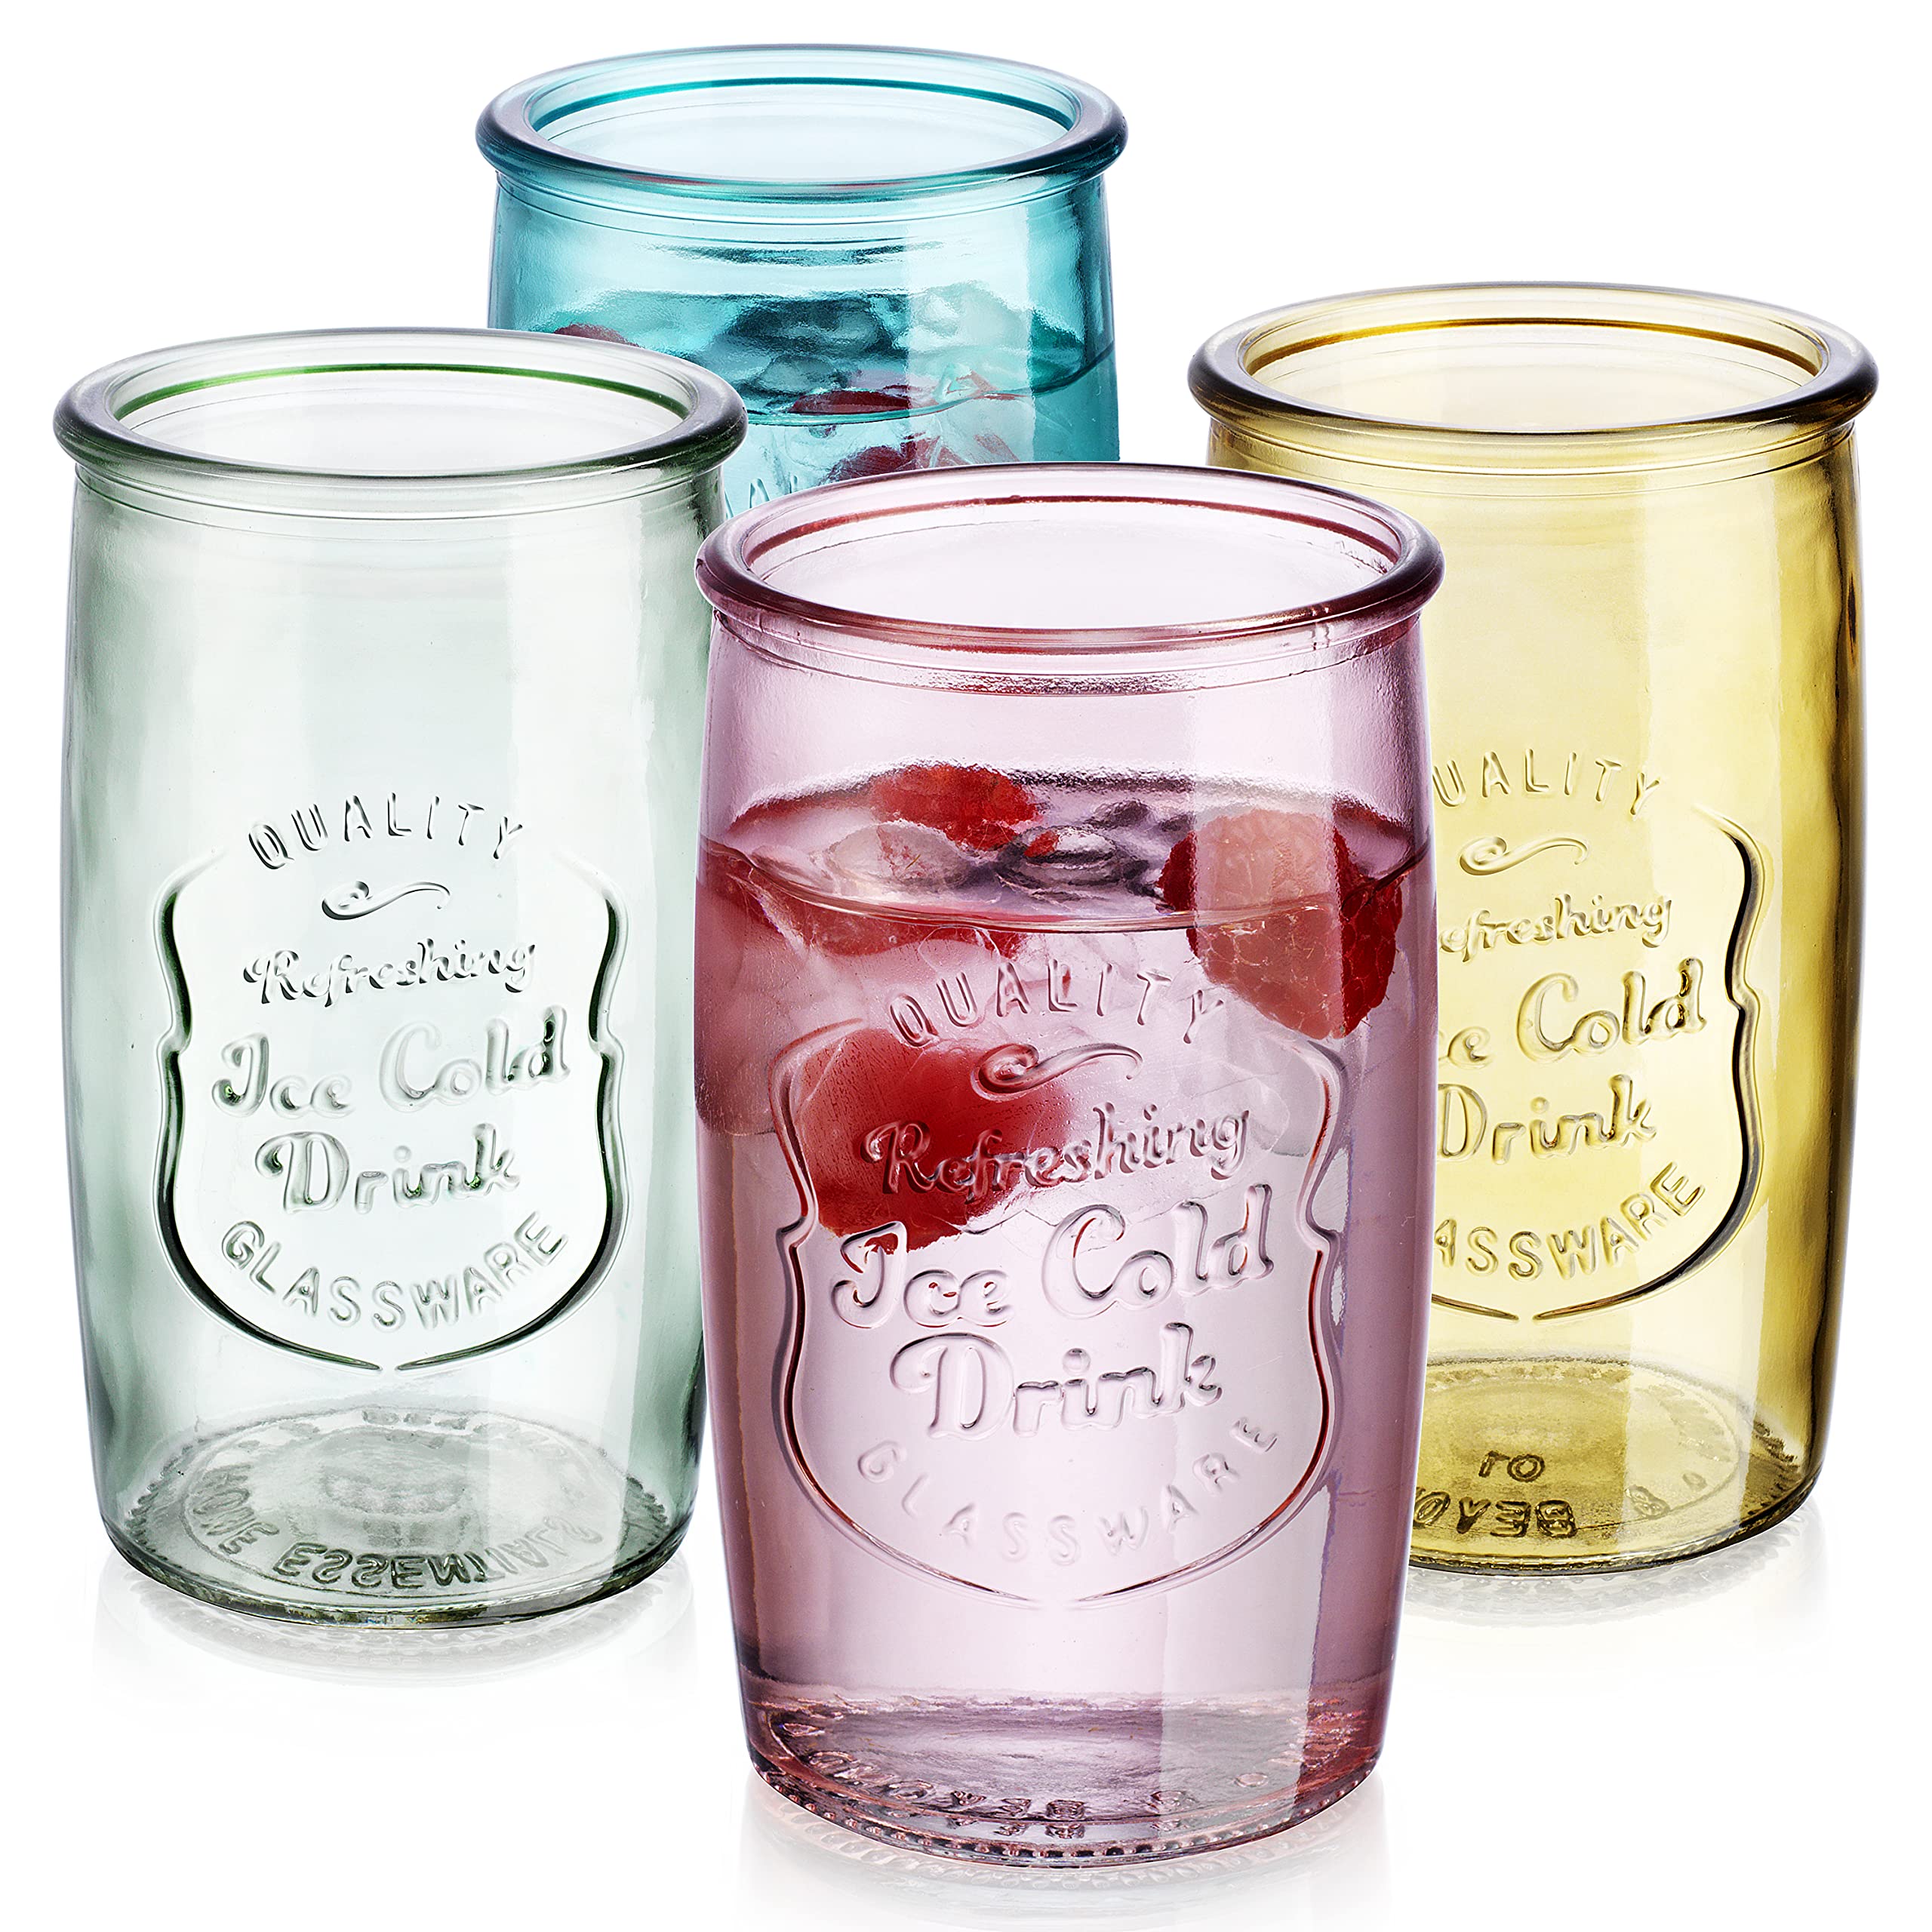 Glaver's Colored Glassware, Ice Cold Drinking Glasses Set of 4 � 18 Oz Vintage Glass Cups for Kitchen, Dining Table � Multi- Colors Glass Tumblers. Hand Wash.  - Good